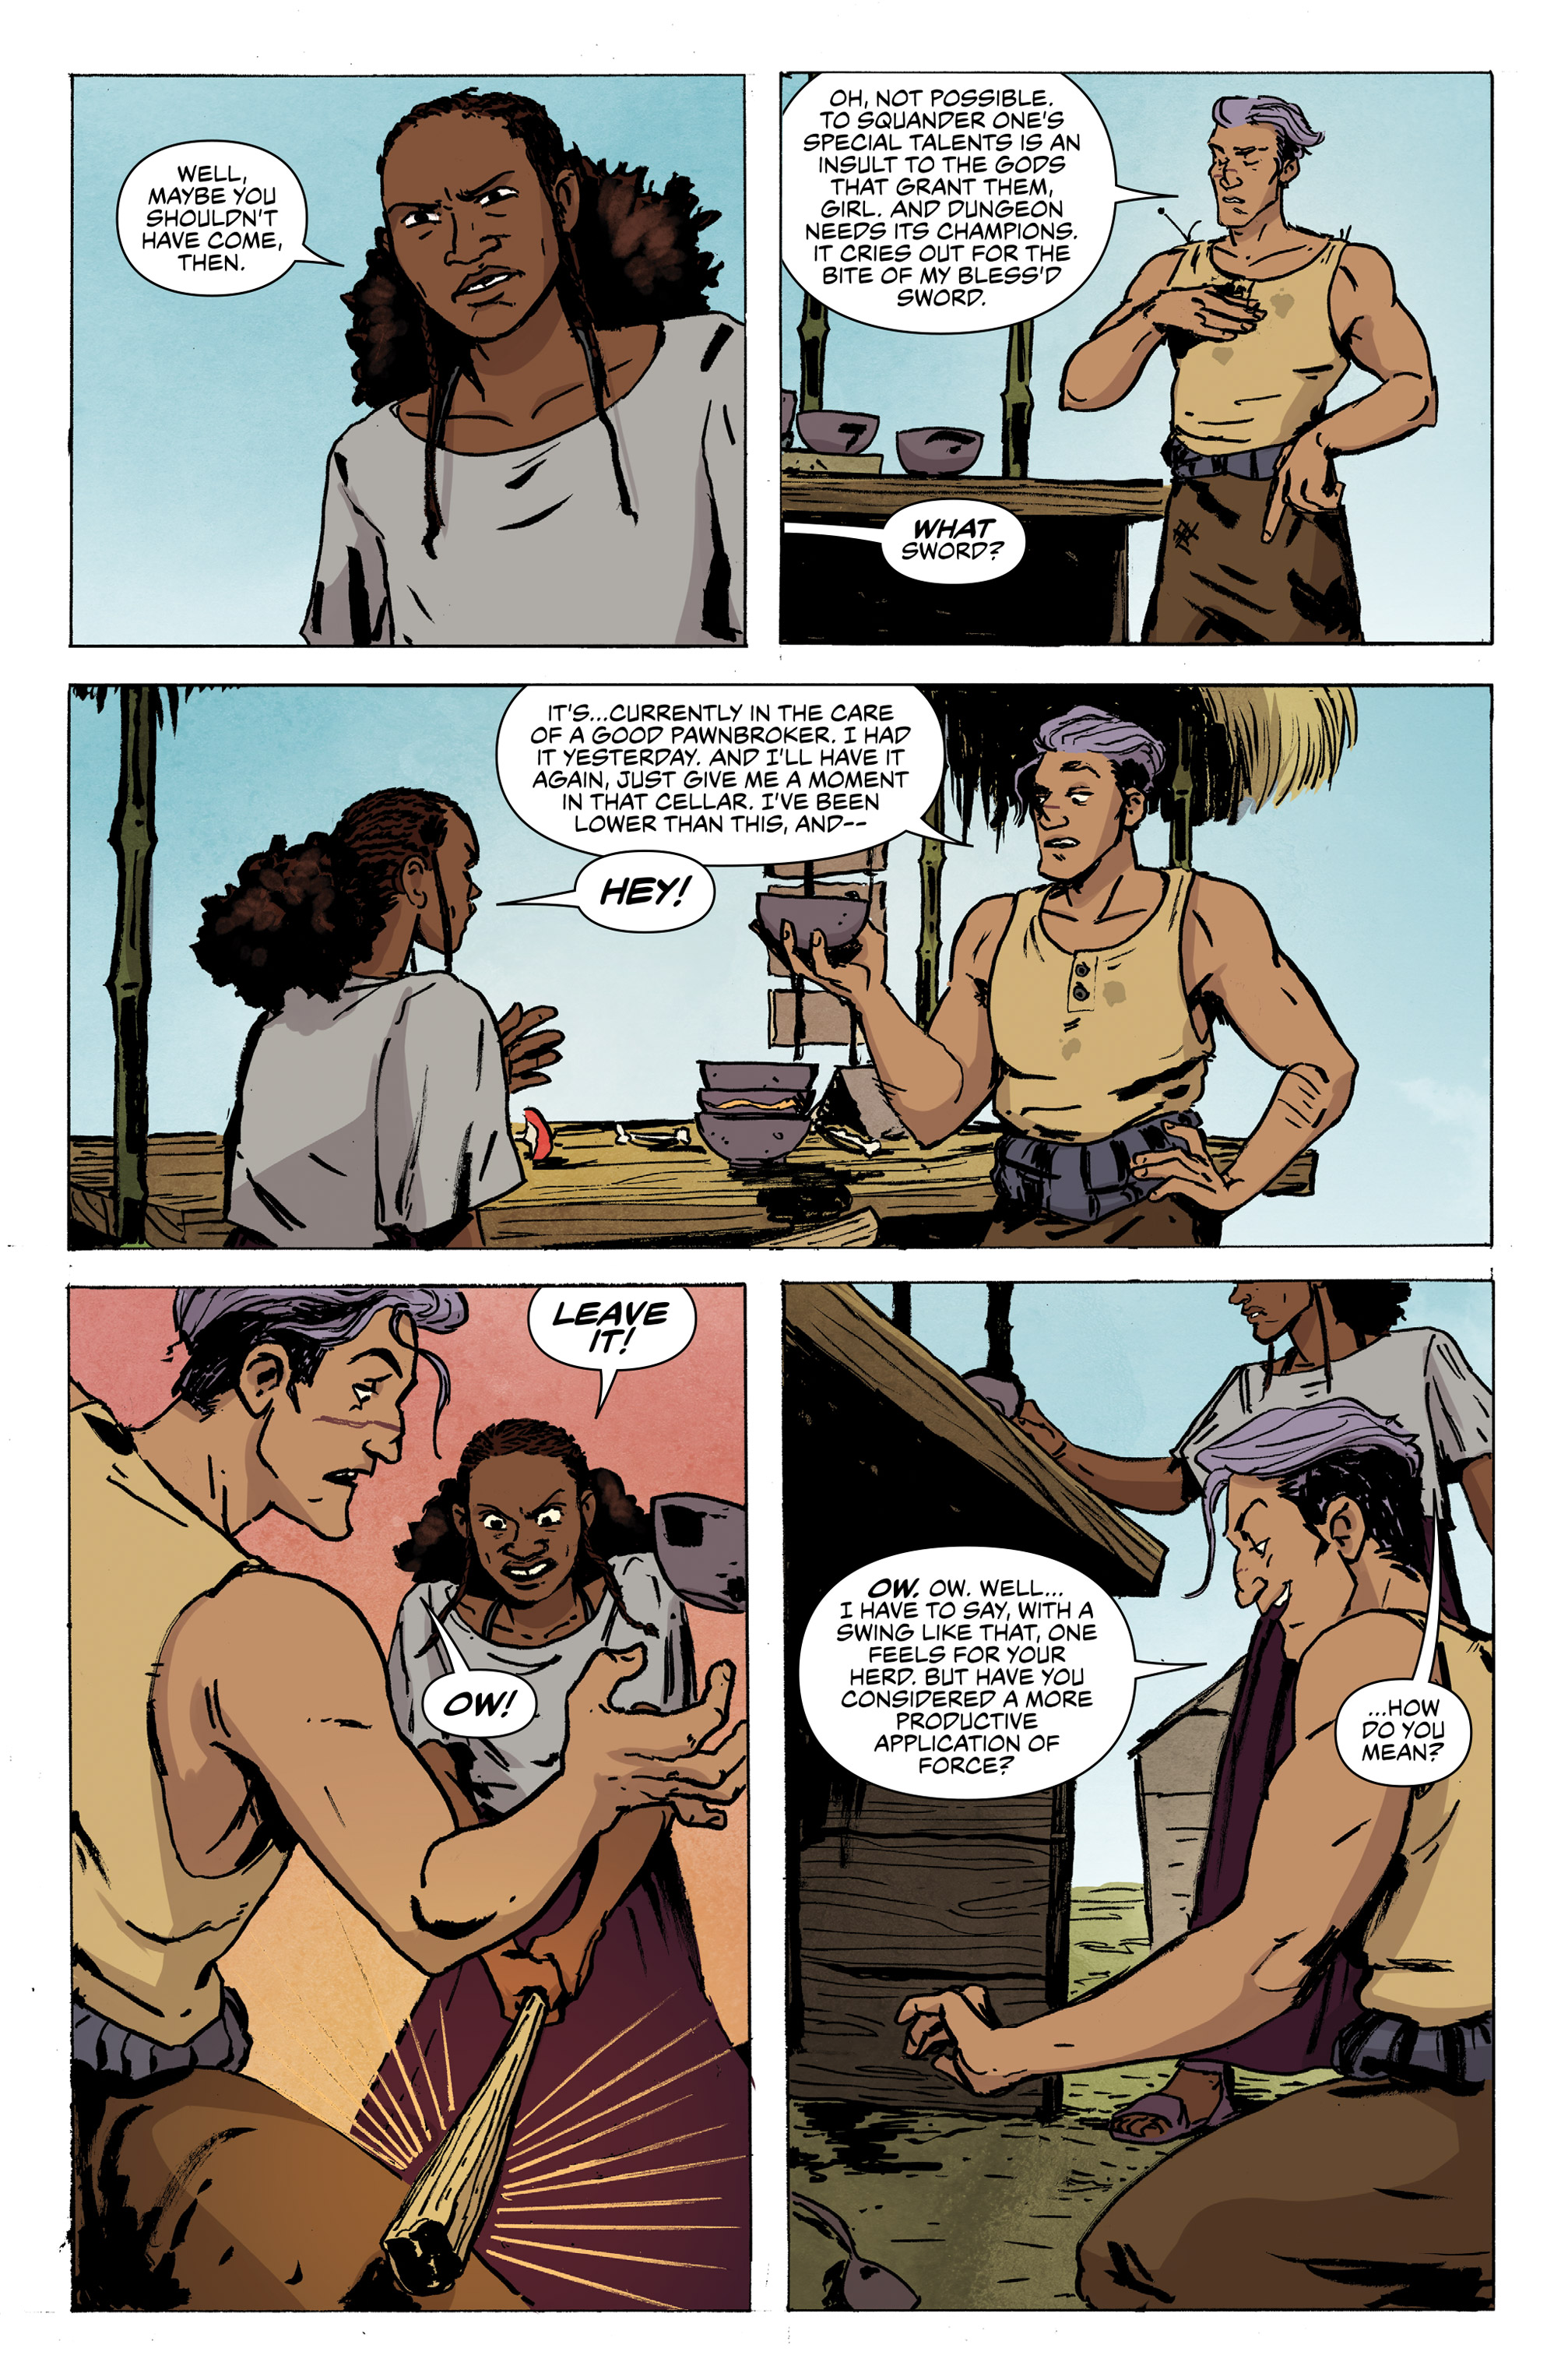 Page 3 of Delver, issue 2.